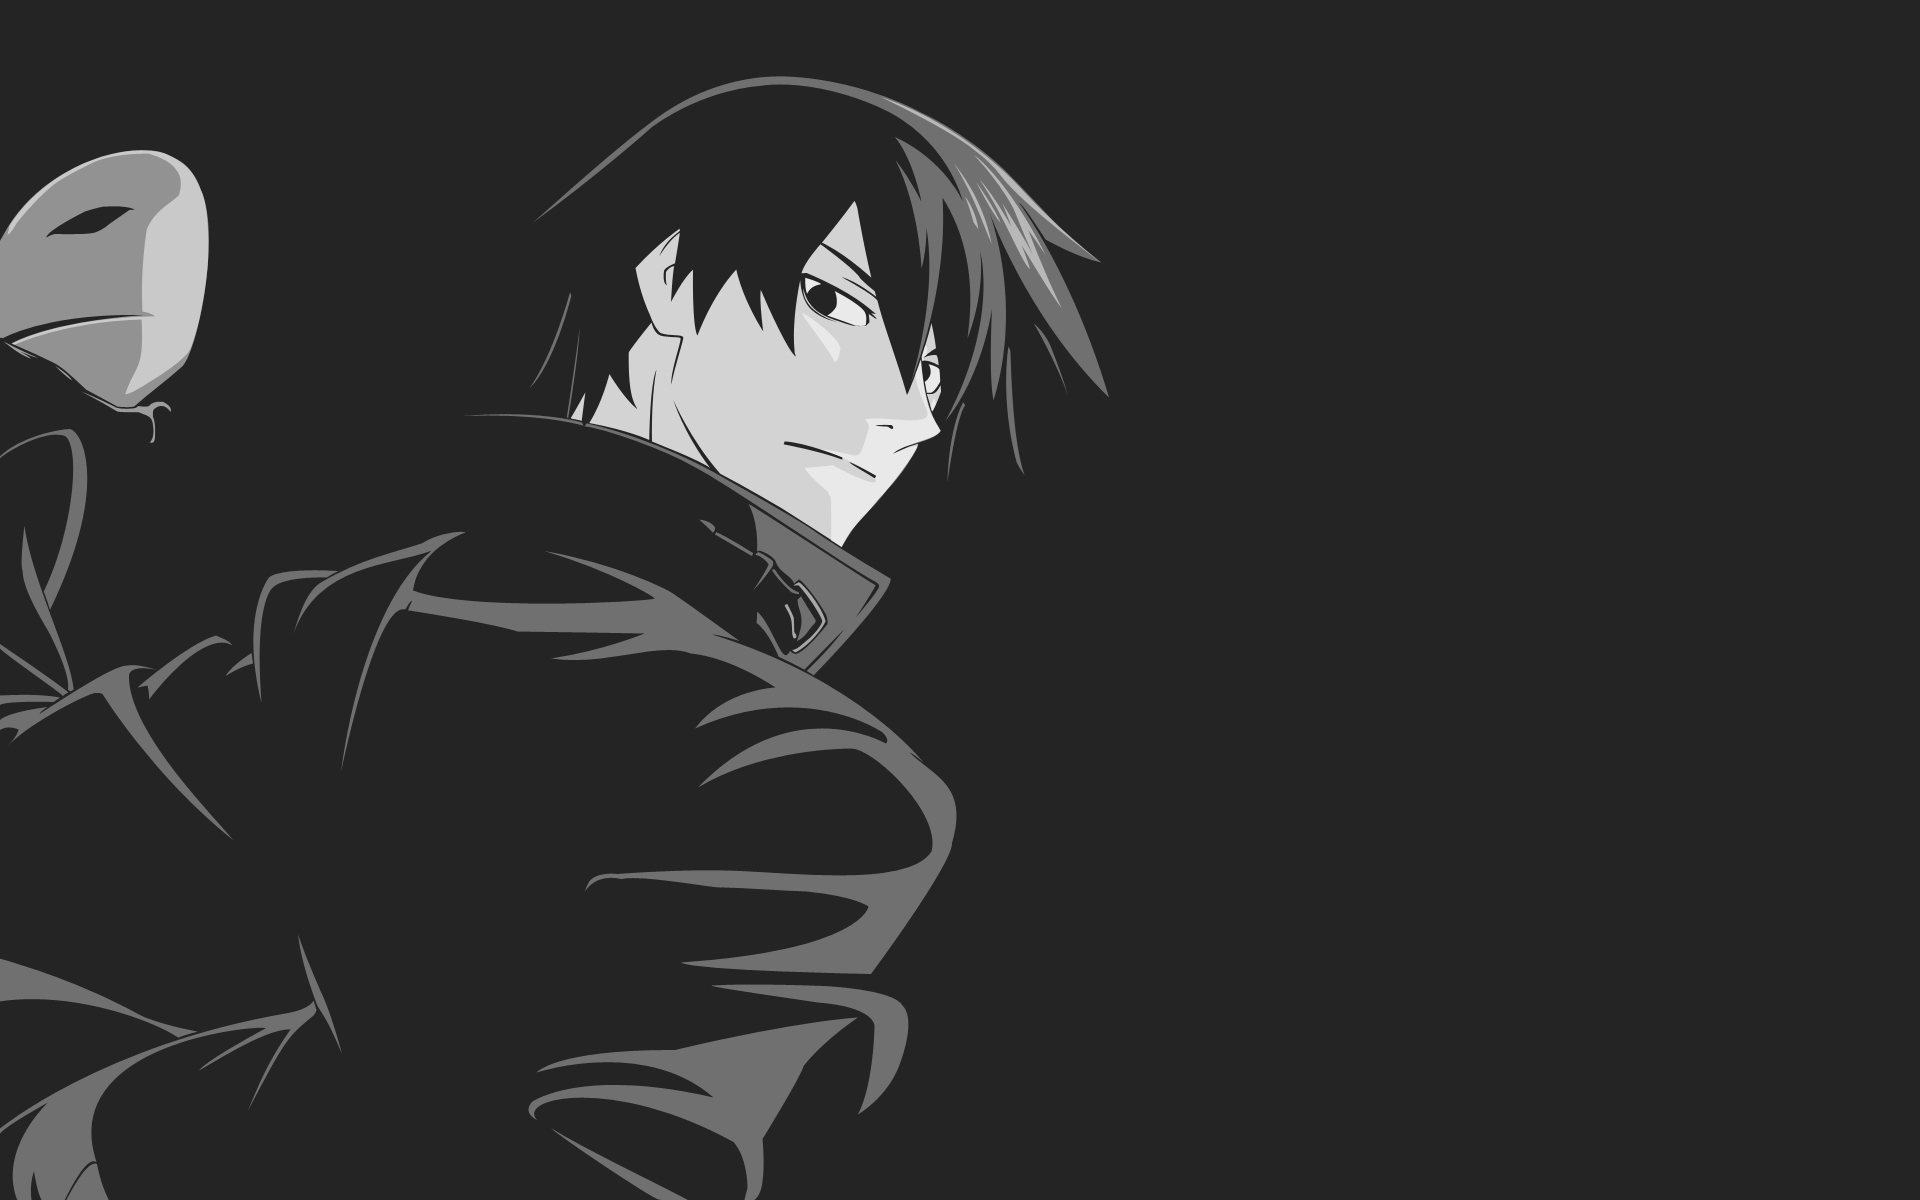 Hei, the protagonist from Darker than Black, in an anime-themed desktop wallpaper.